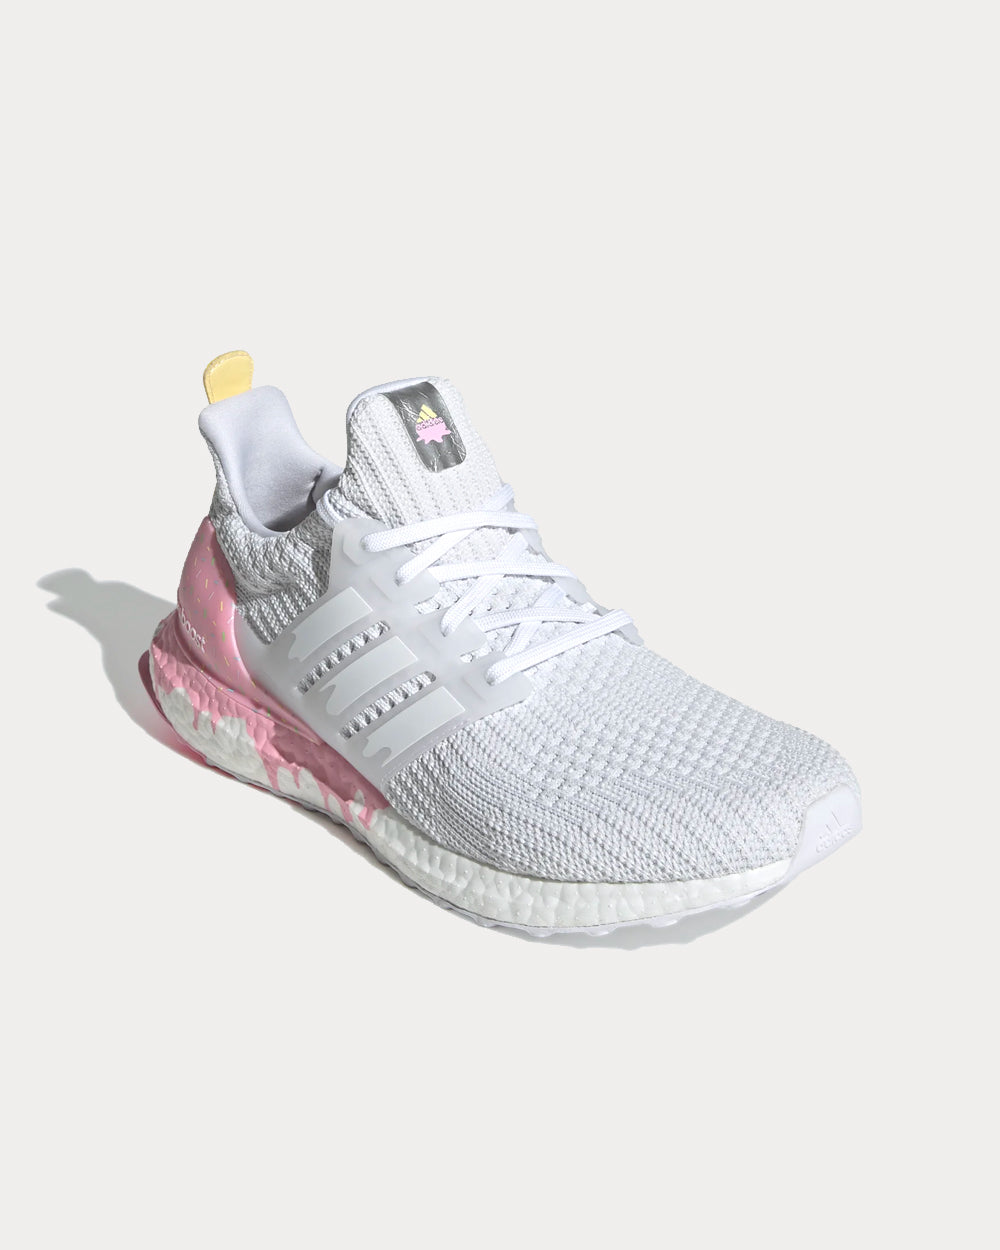 Adidas - Ultraboost DNA Cloud White / Cloud White / Light Pink Running Shoes